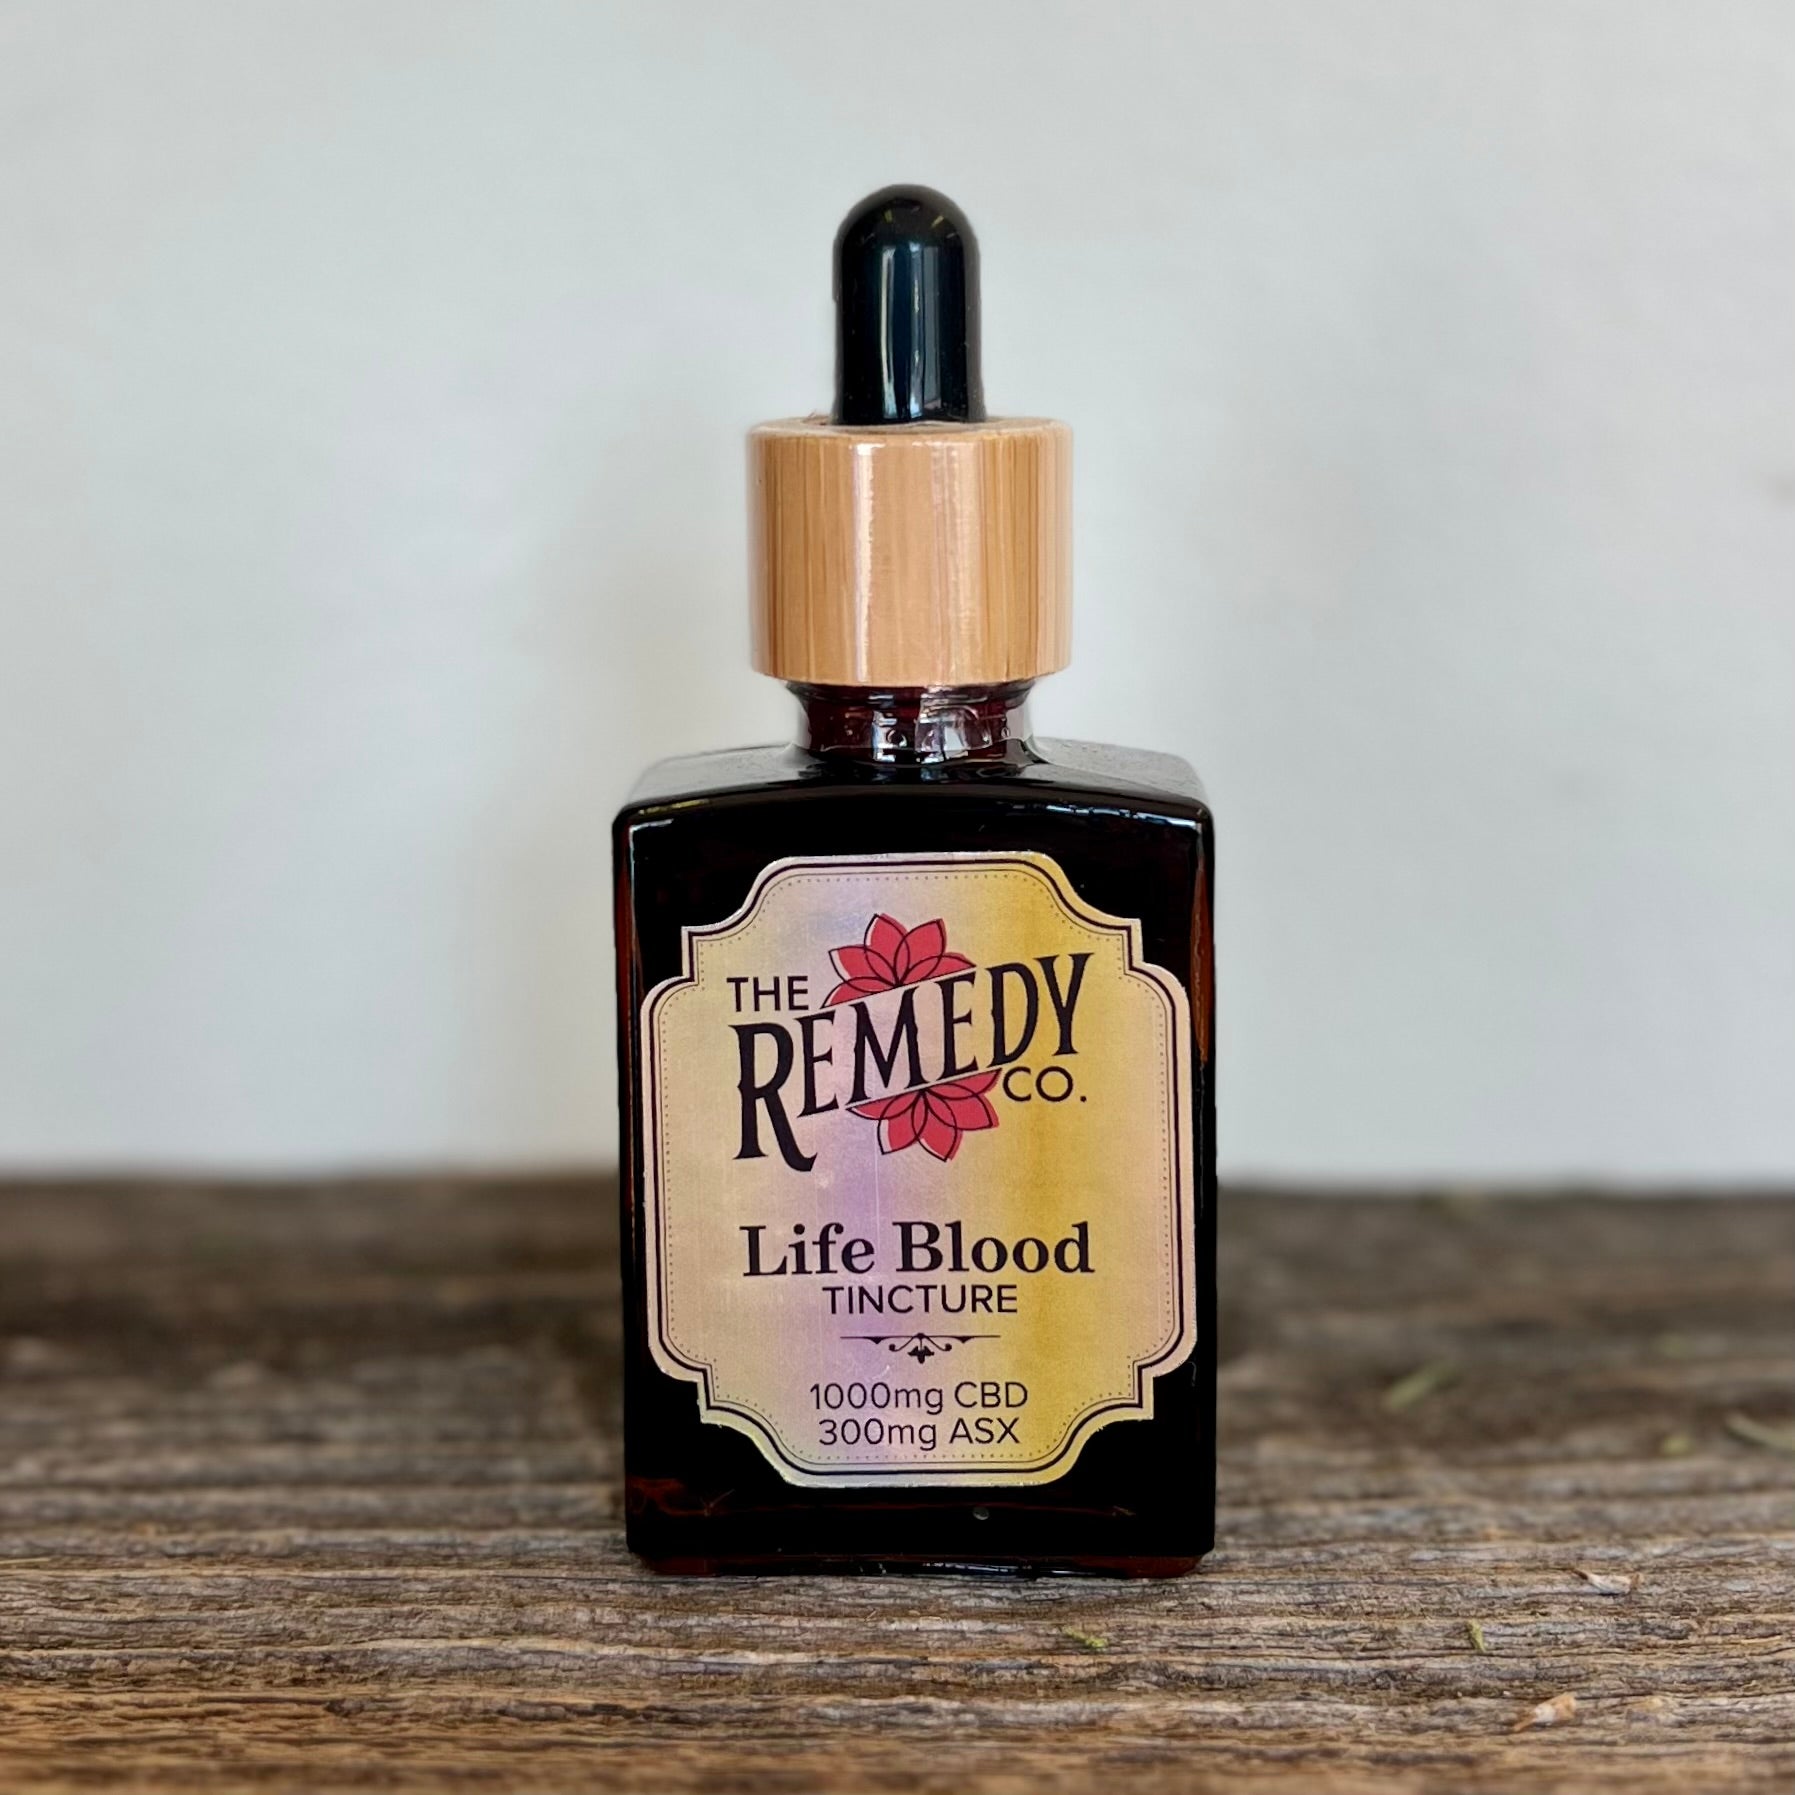 Life Blood Tincture Essential Oil+ - The Remedy Co.